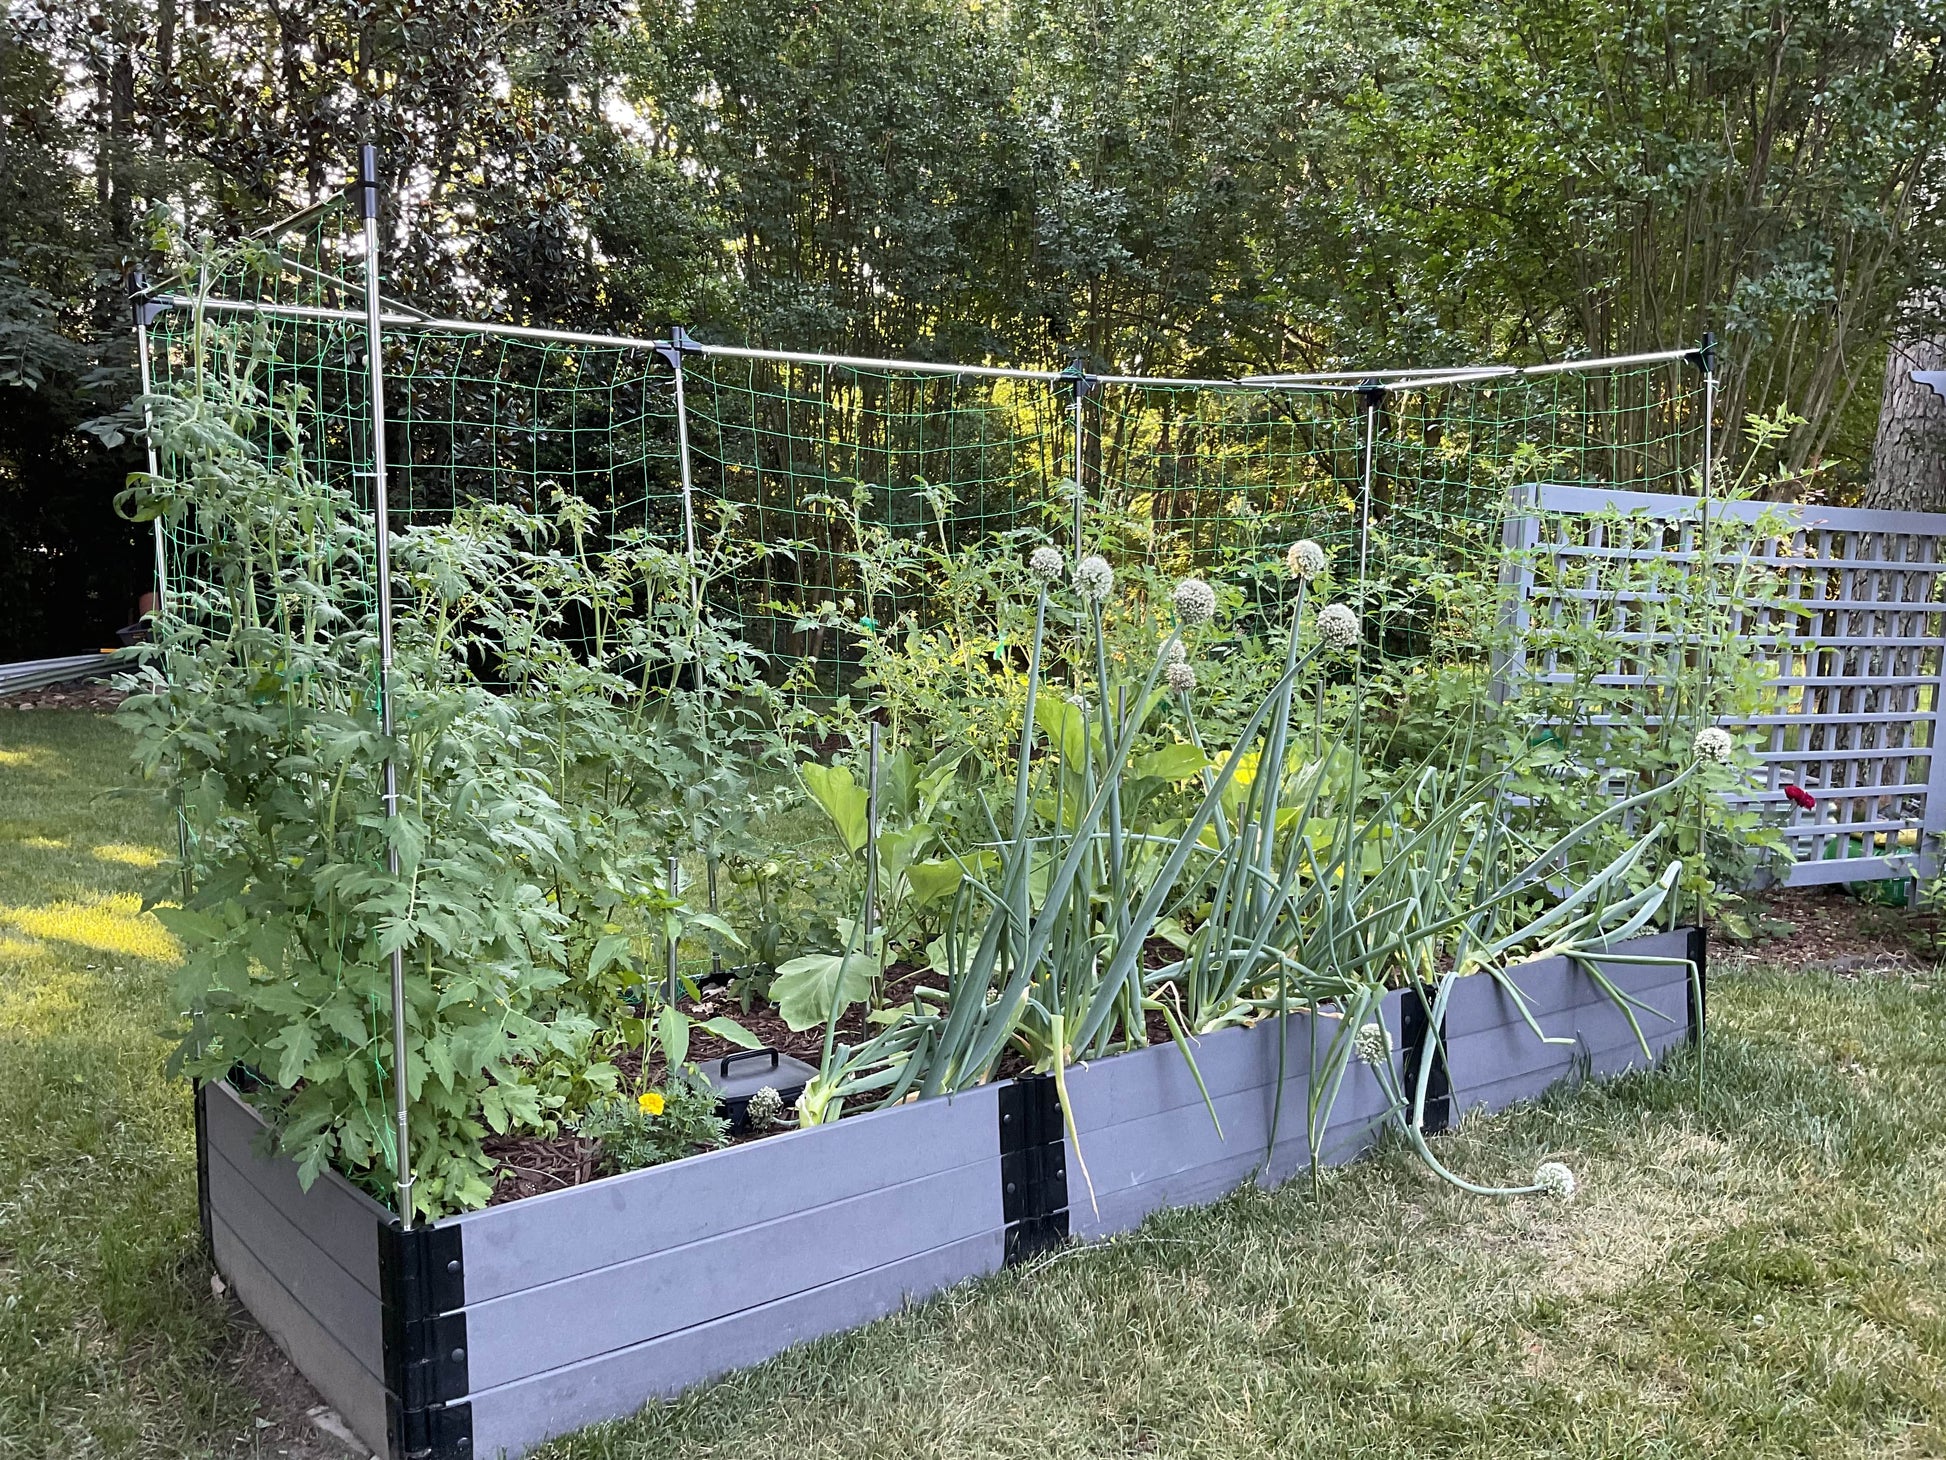 4' x 12' Raised Garden Bed with Trellis Raised Garden Beds Frame It All Weathered Wood 1" 3 = 16.5"